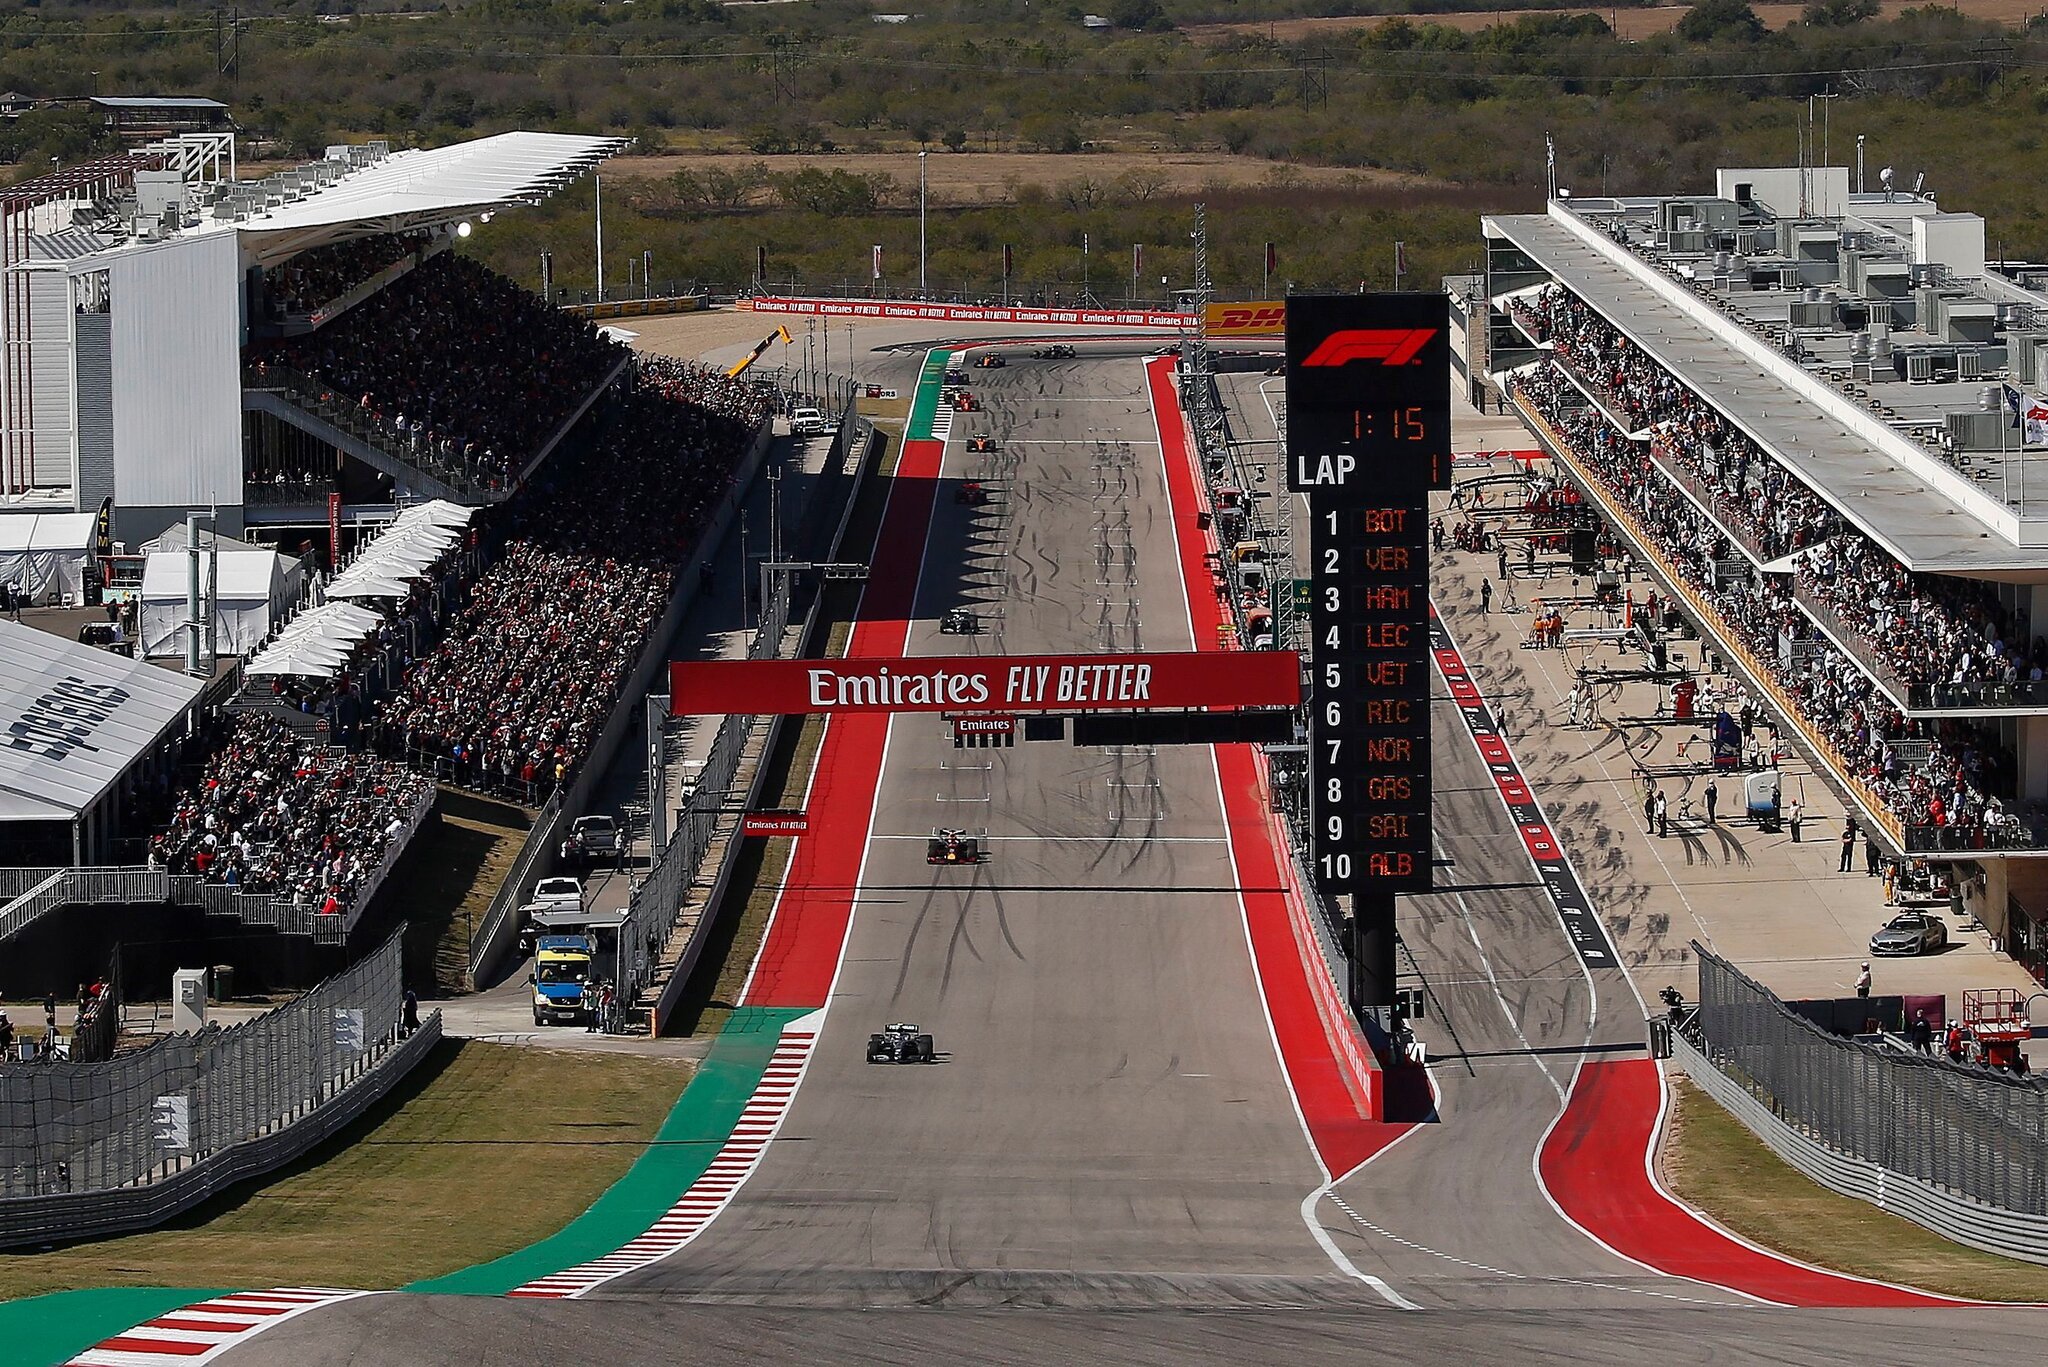 Formula 1 F1 races to continue at Circuit of the Americas until 2026